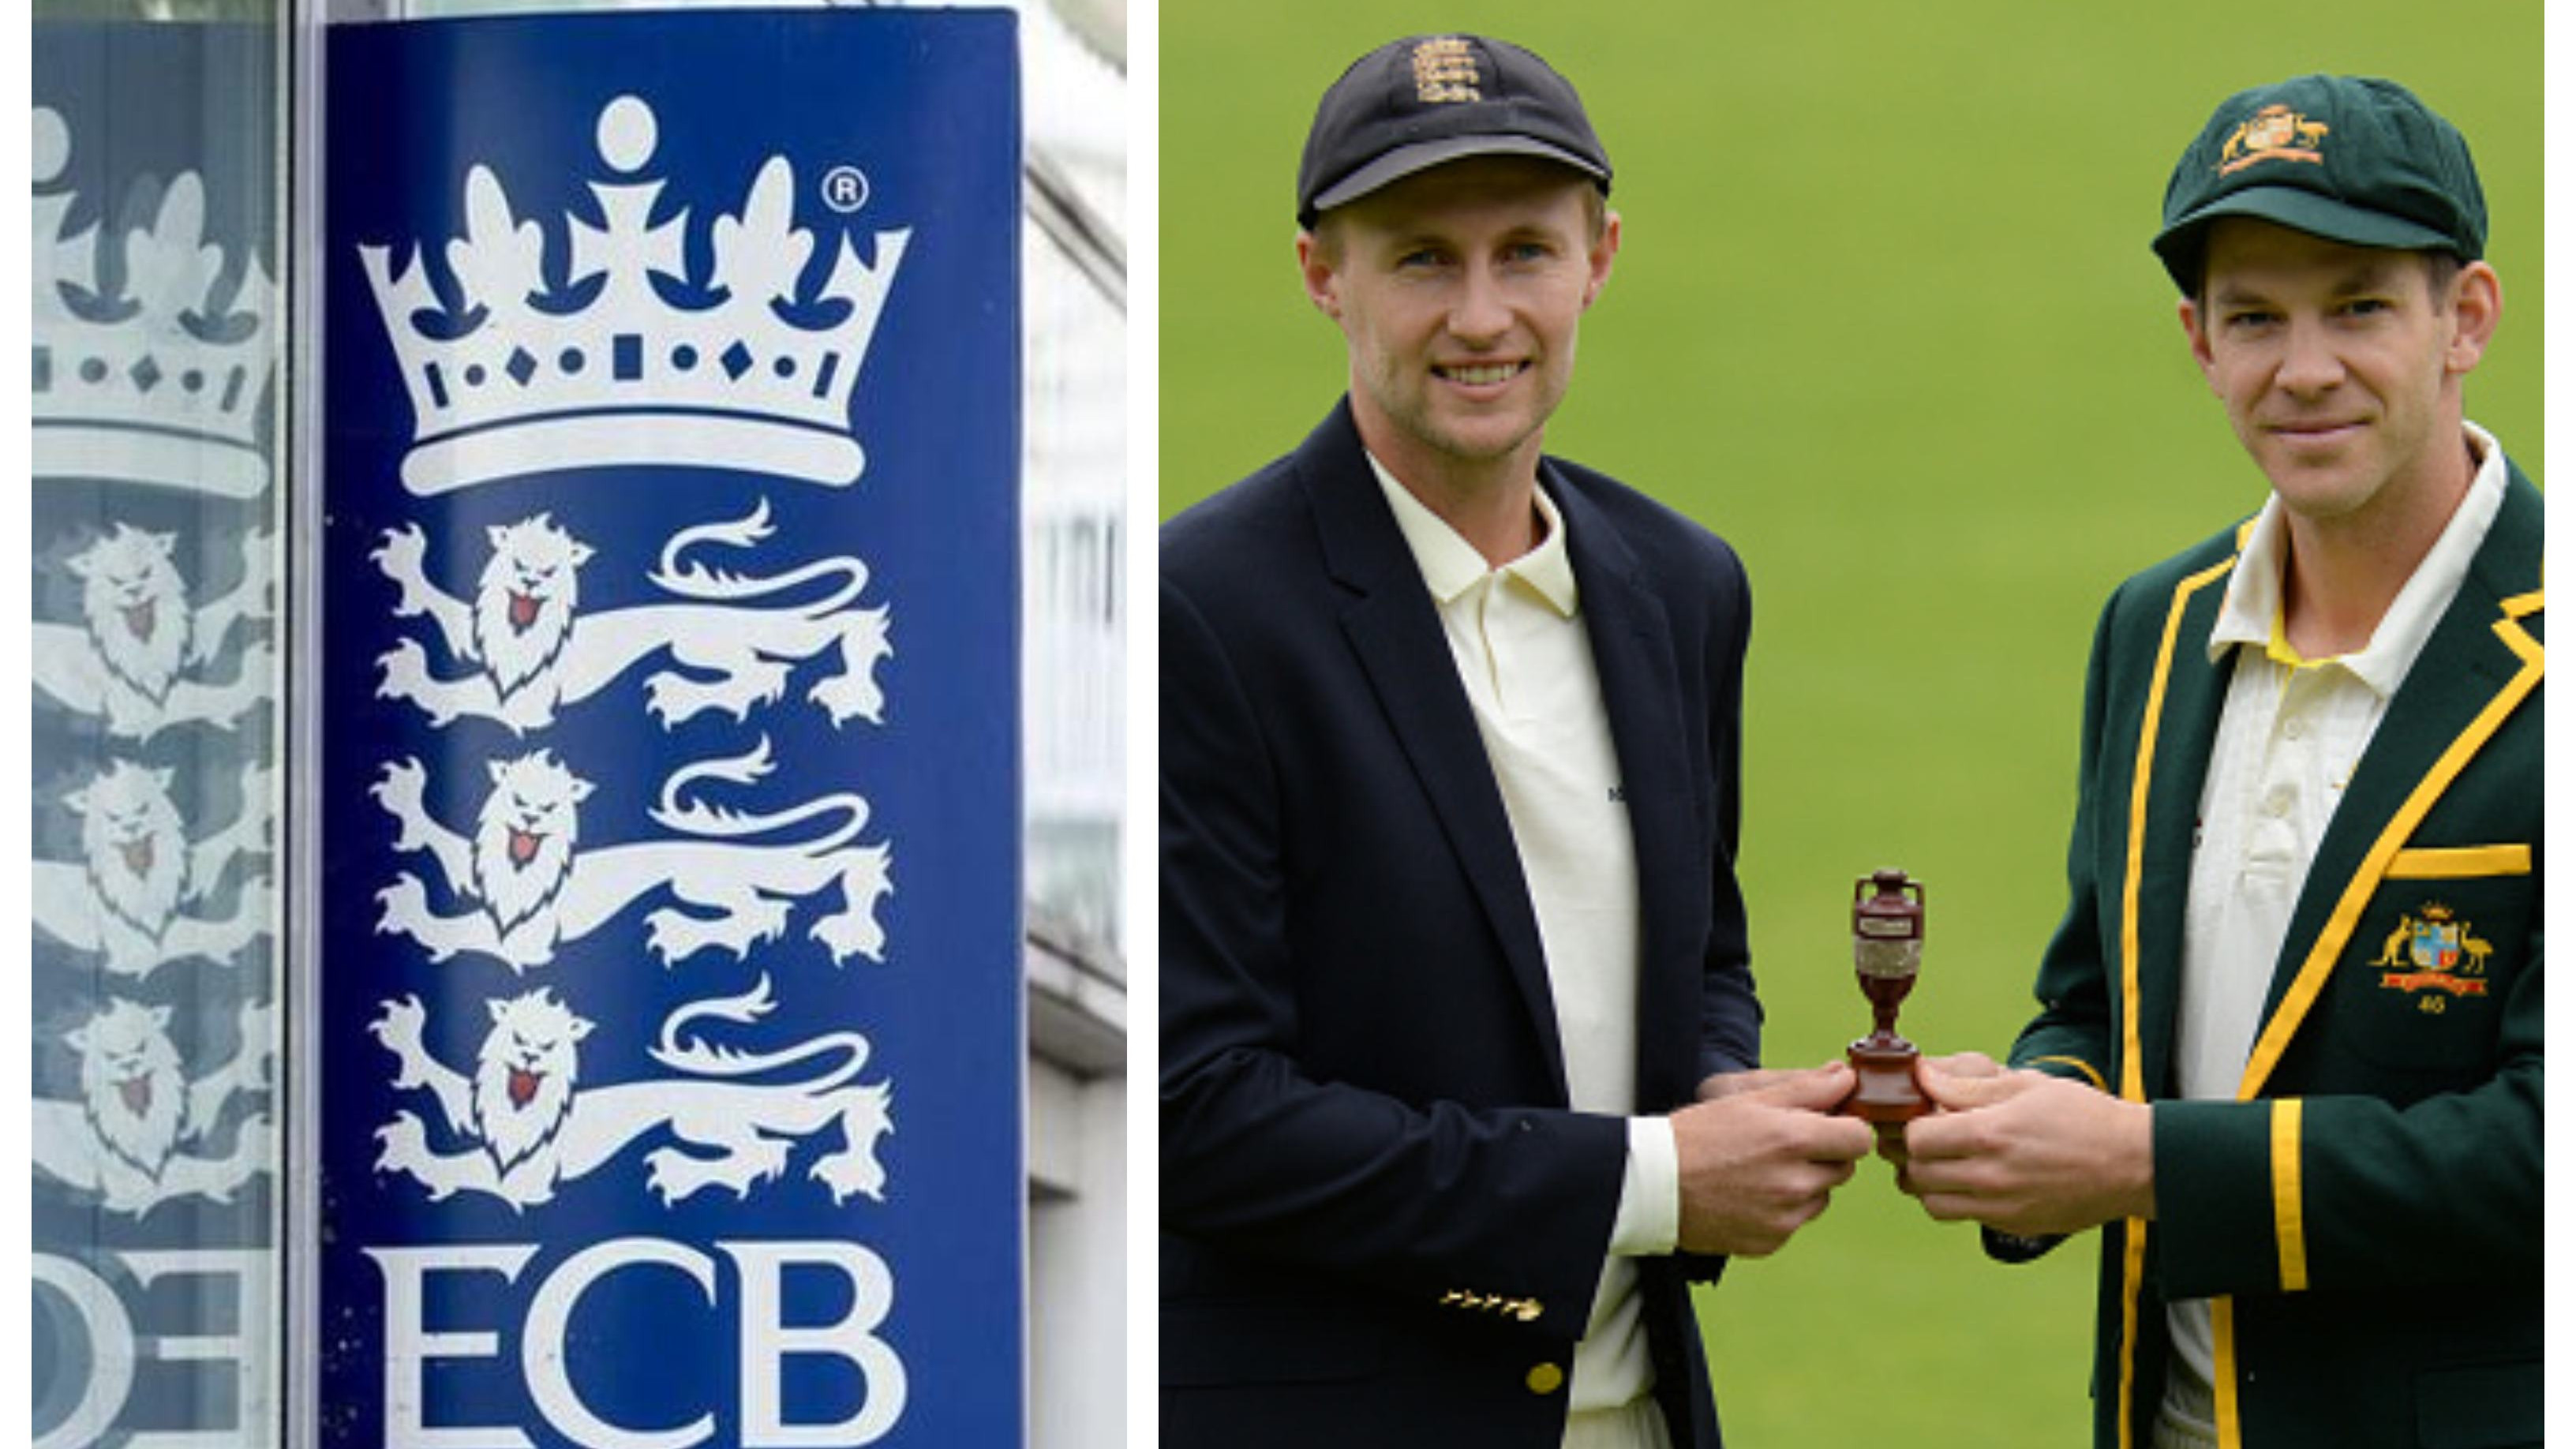 ASHES 2021-22: ECB confirms Ashes series to go ahead subject to several conditions being met